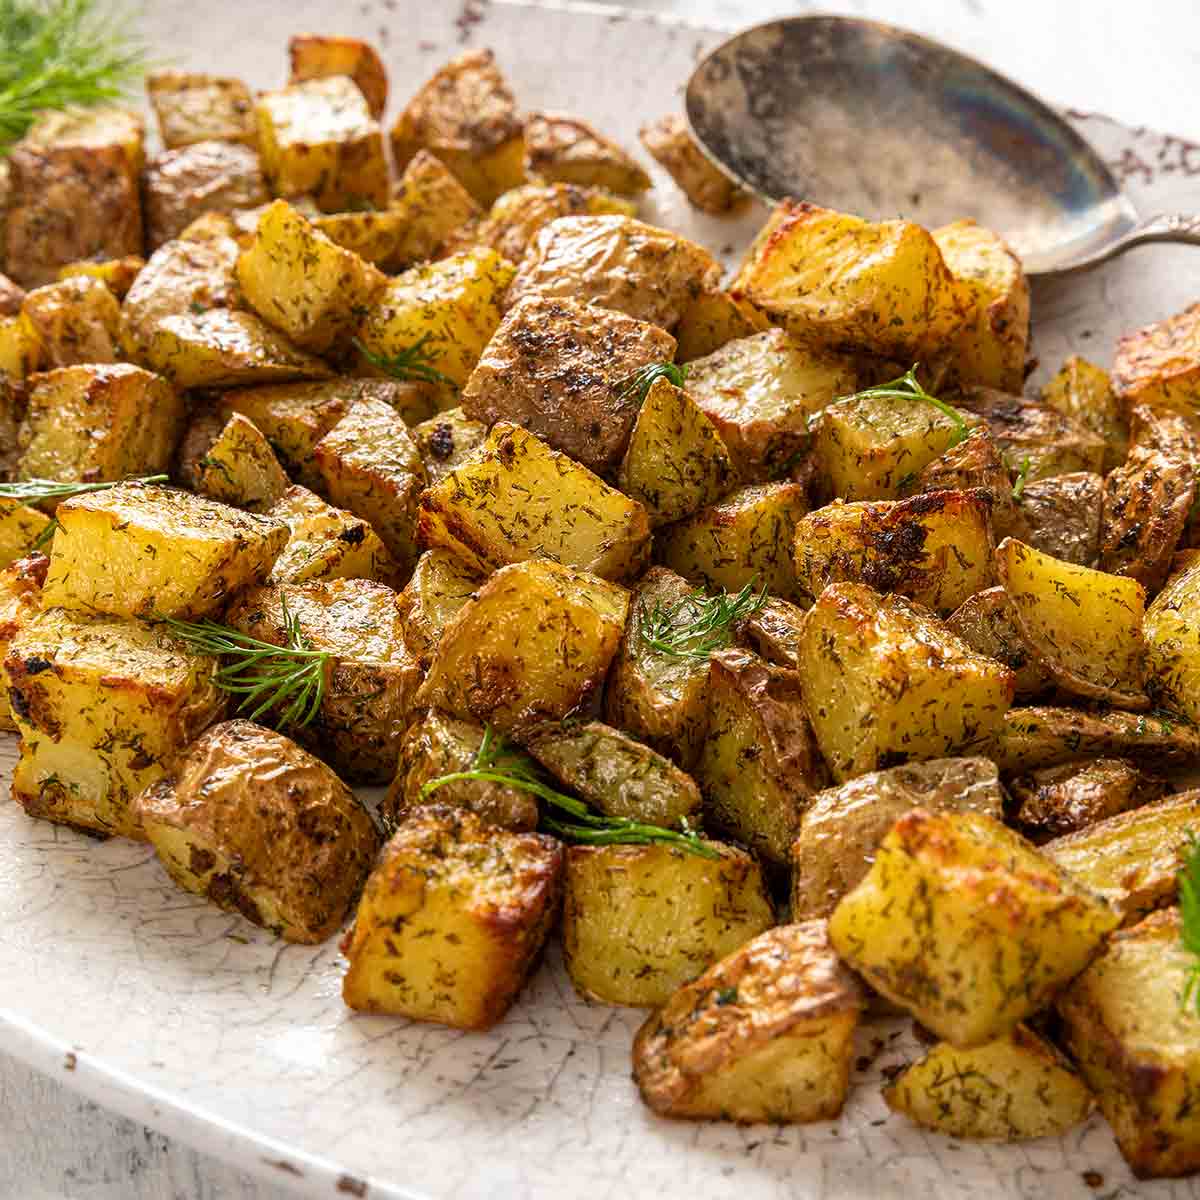 An oval platter filled with cubed roasted potatoes, garnished with fresh dill.